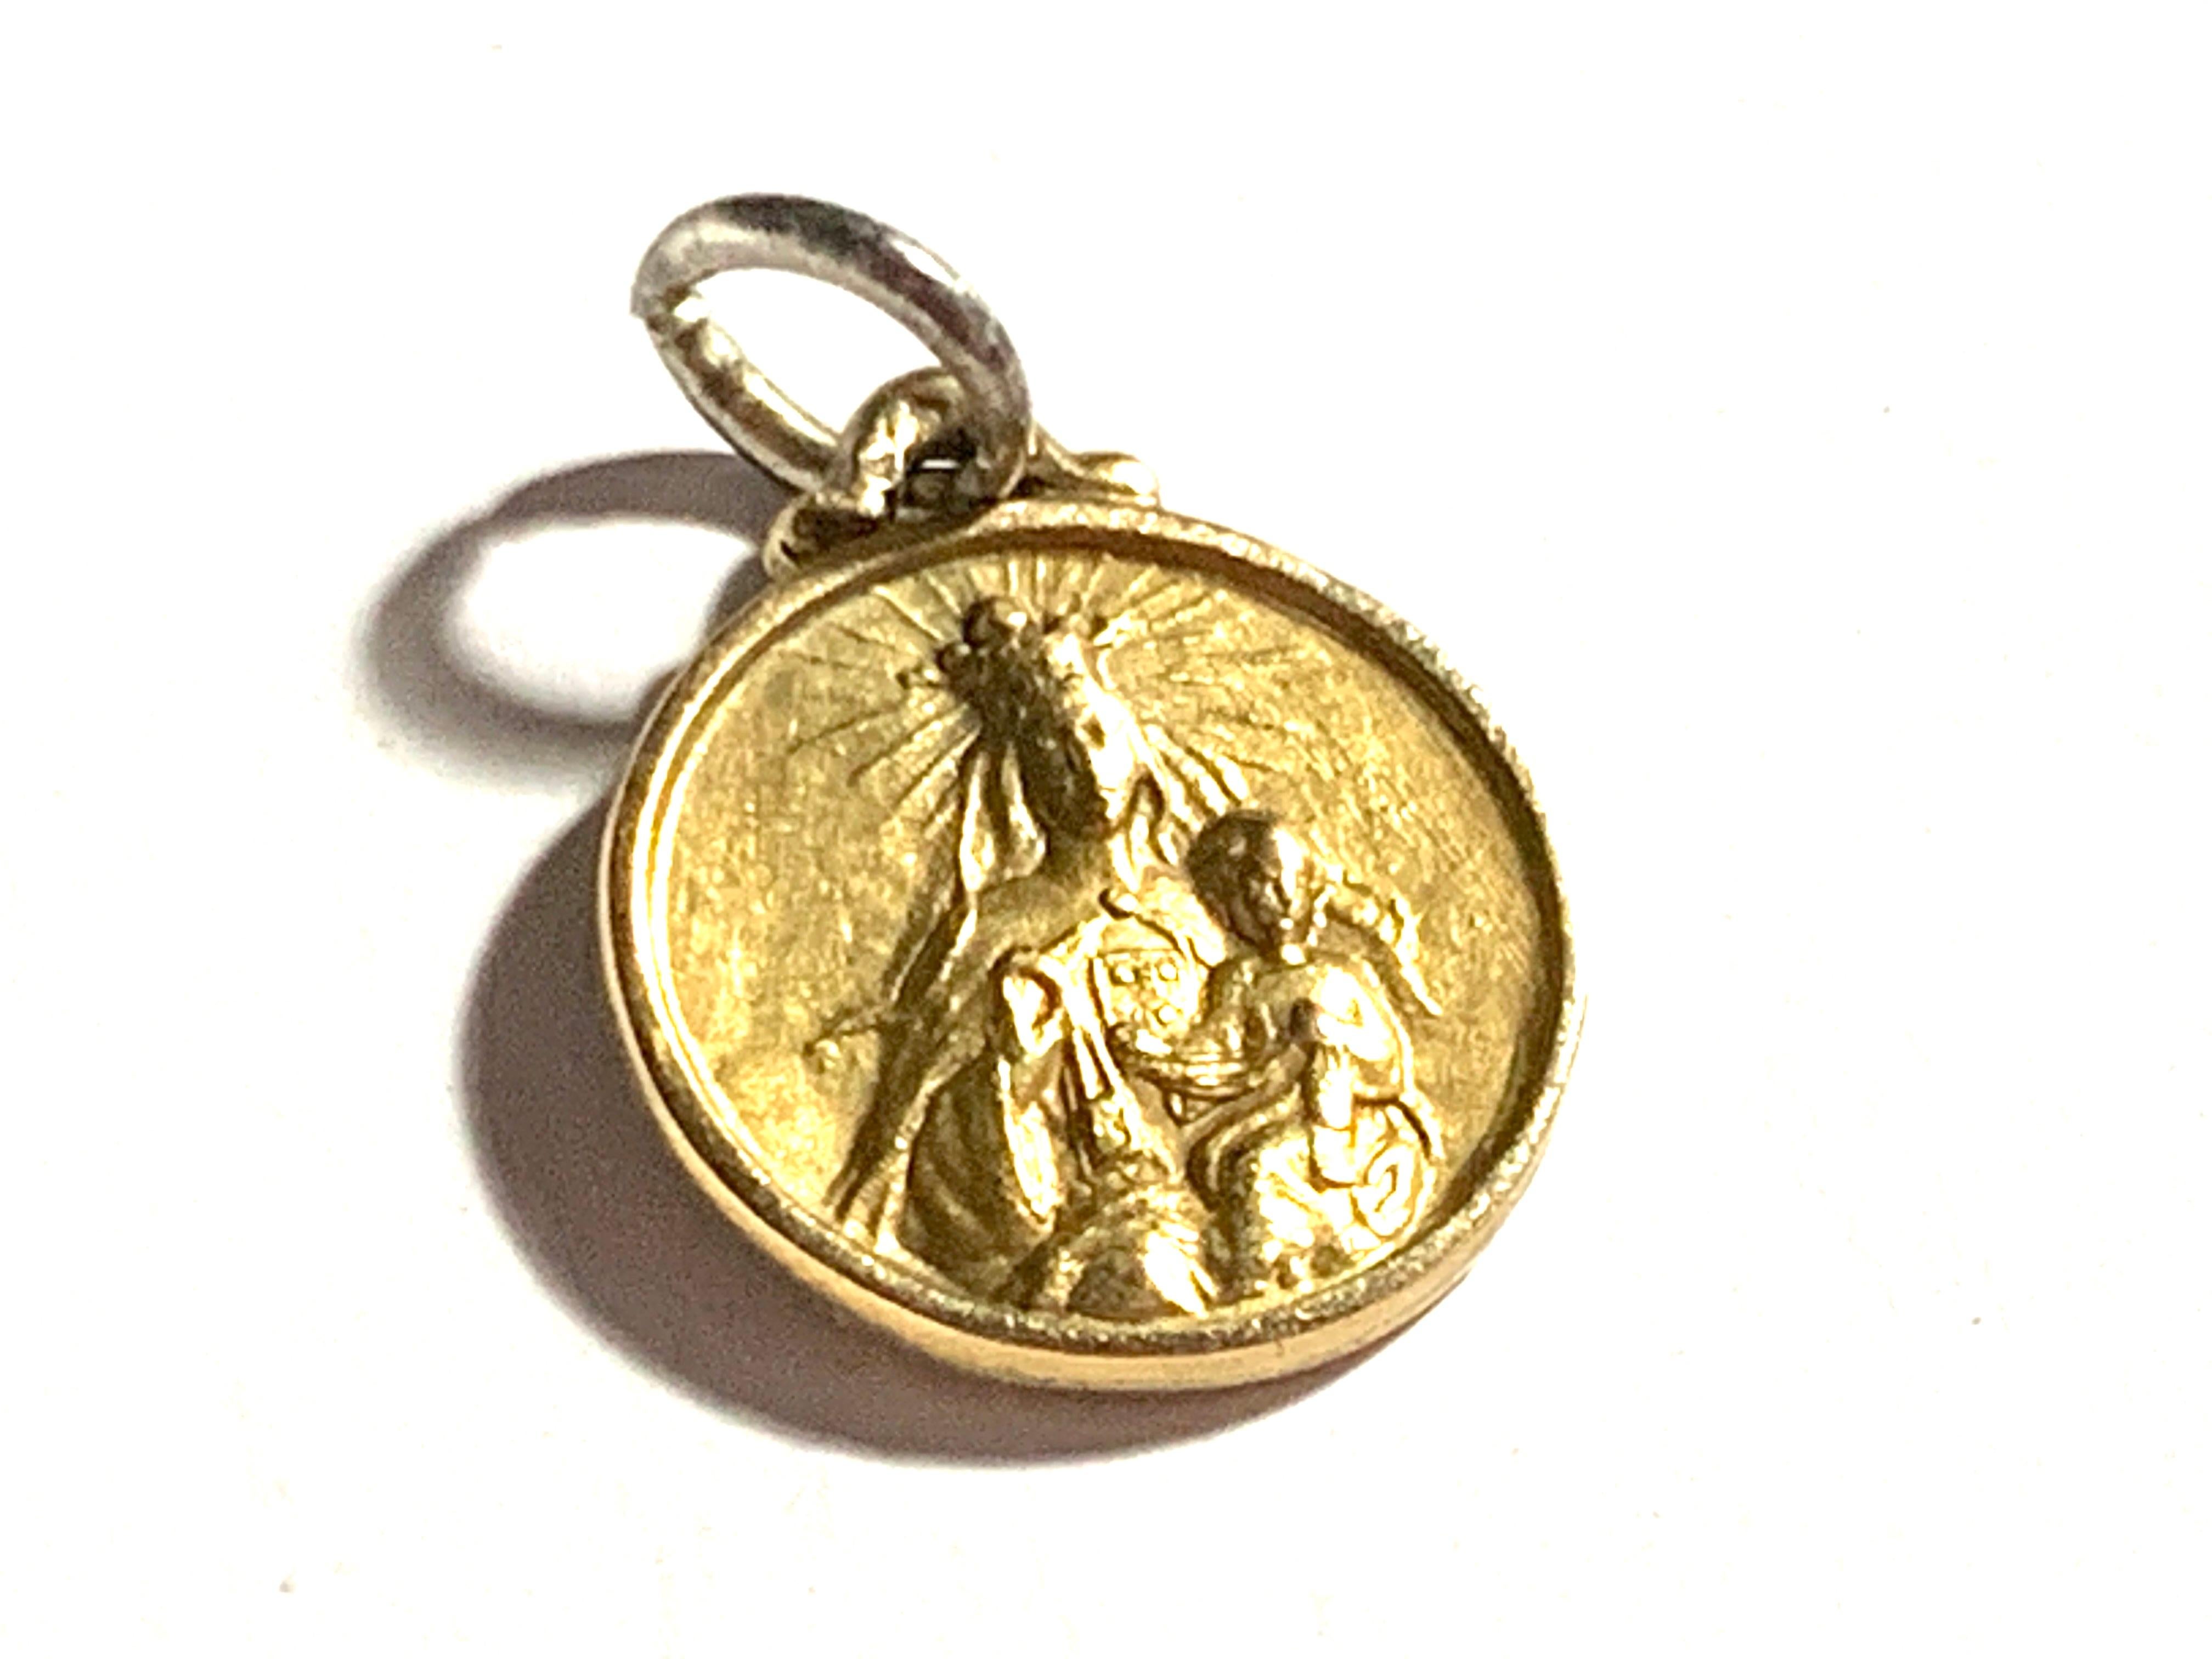 Beautiful Antique
Mother Mary & Baby Jesus religious Pendant
18ct 750 Gold 
Circa 1890s
weight 1.38 grammes
Diameter 12mm
the bolt ring has been silvered on top of 18ct gold - this is usual for this era